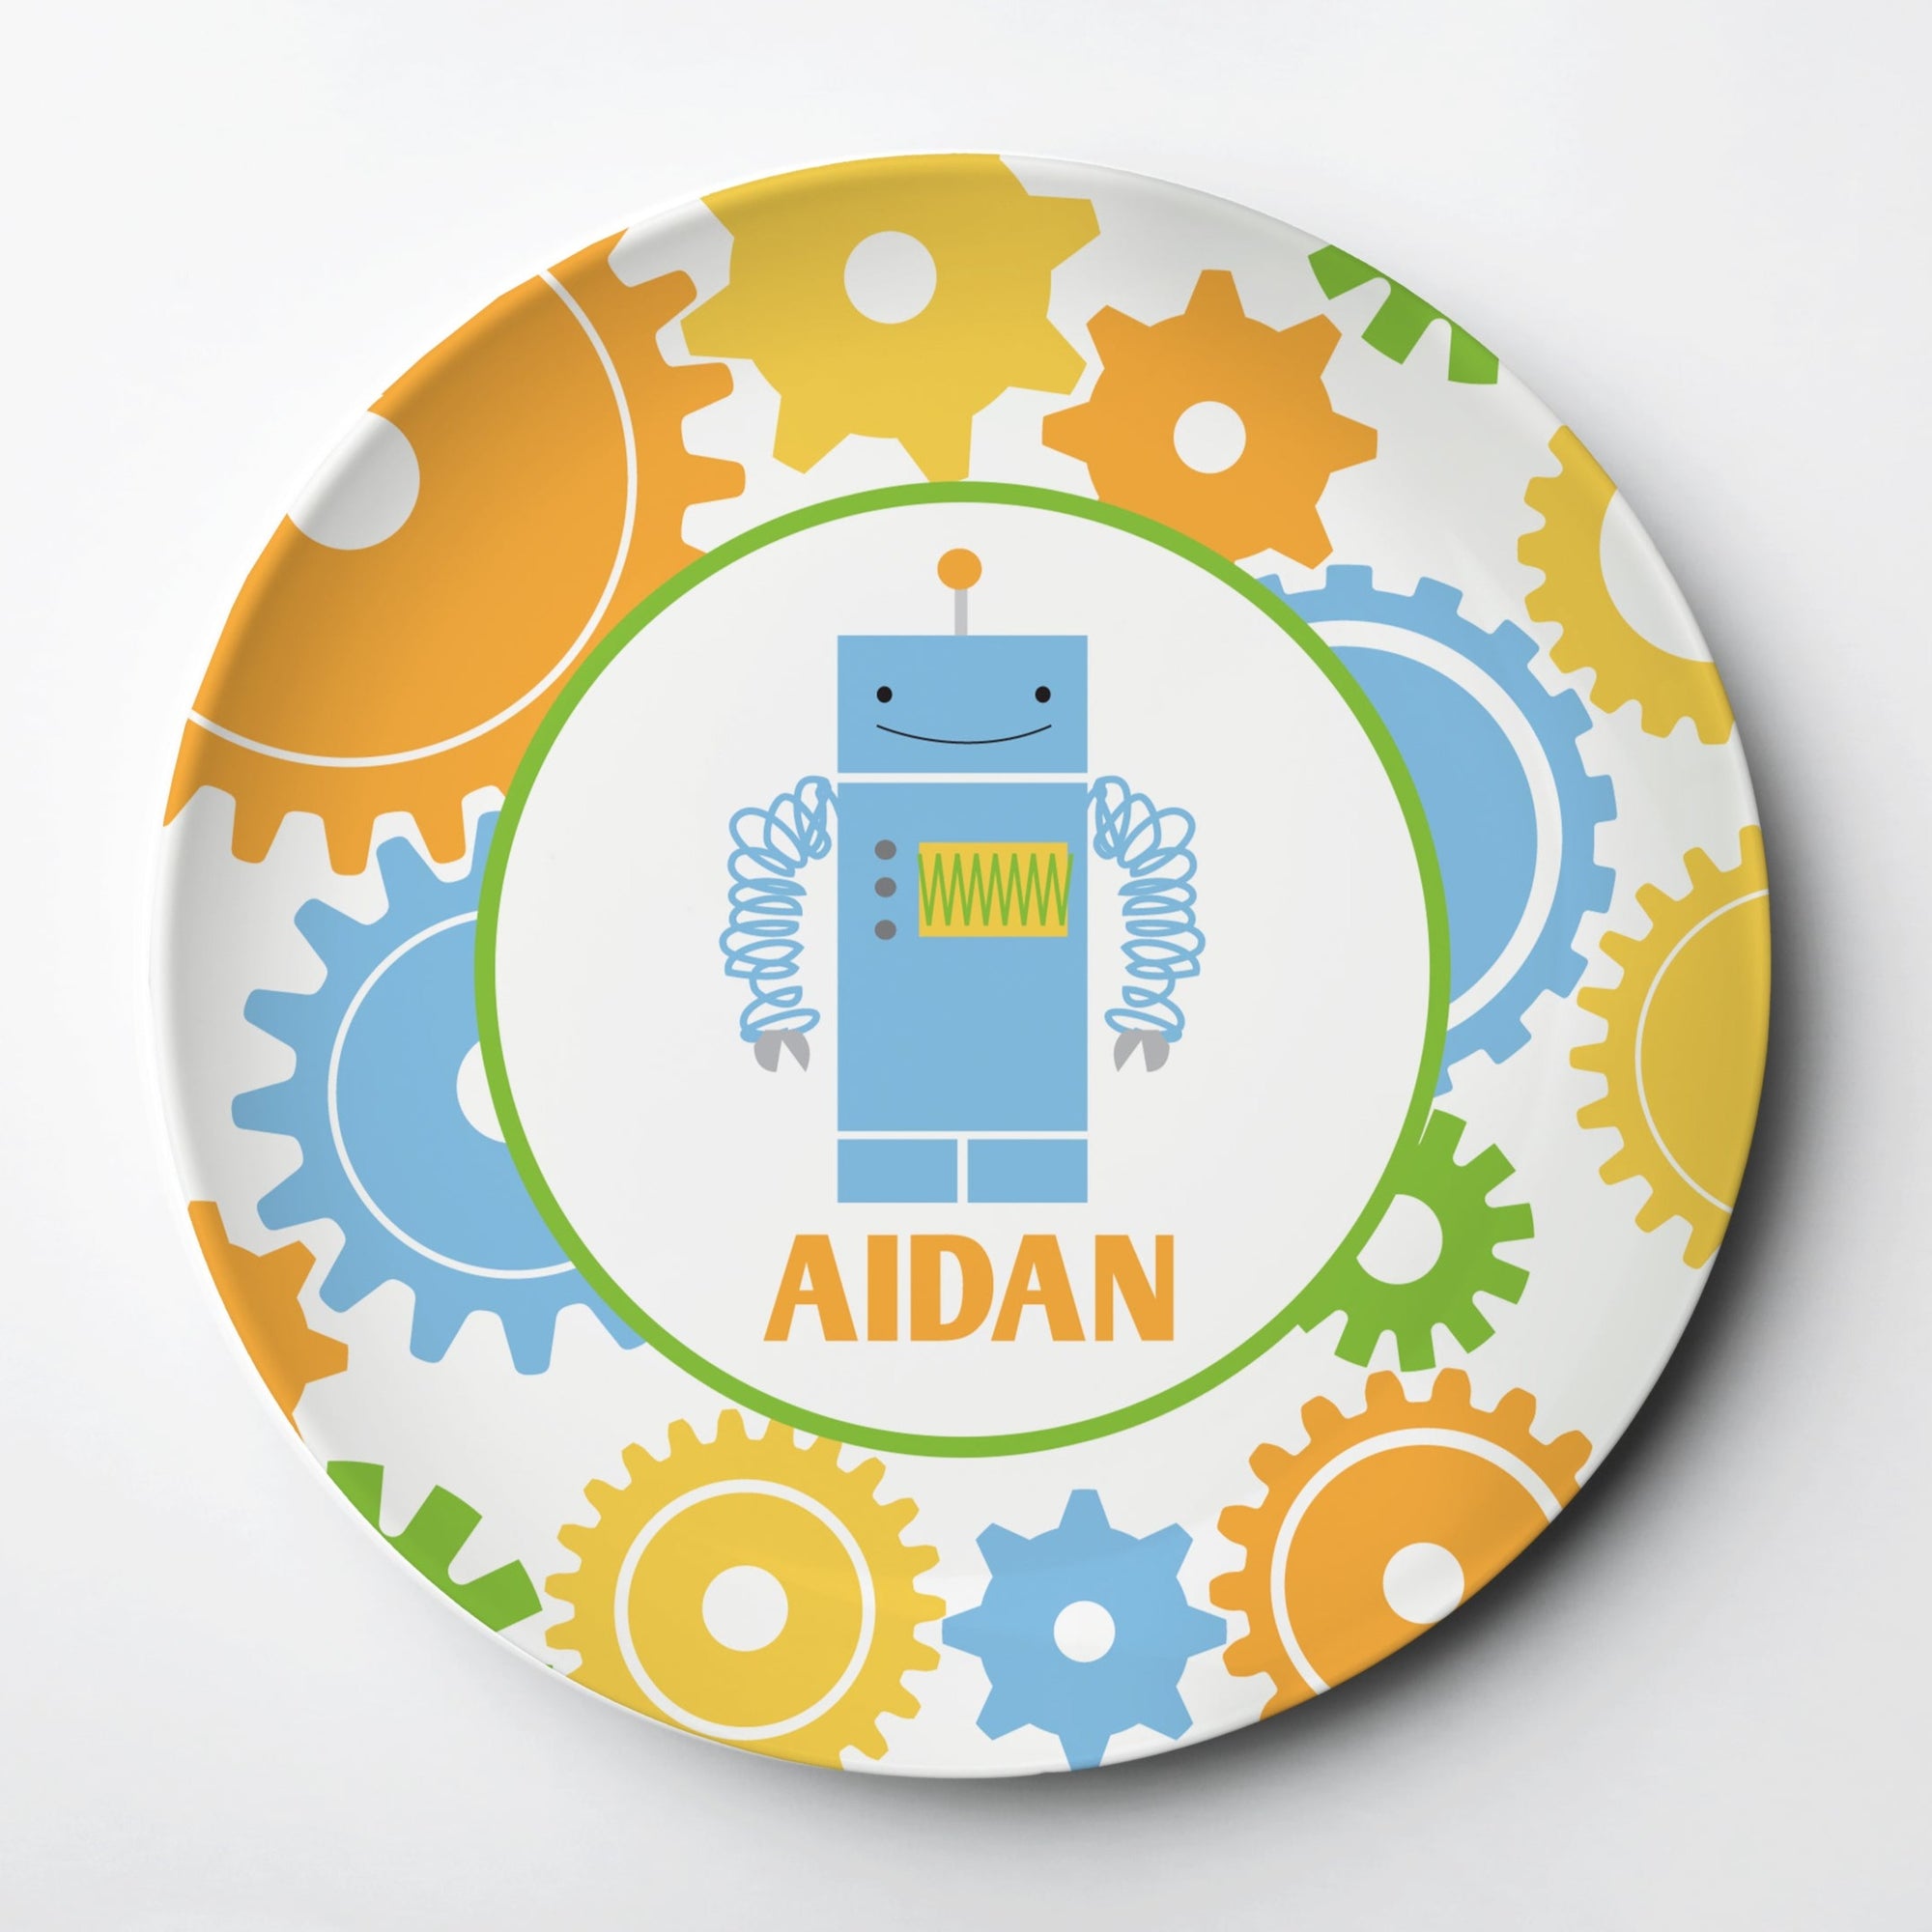 Personalized kids Robot plate, ThermoSāf® kids reusable plate, microwave, dishwasher and oven safe.  Made in the USA, Pipsy.com